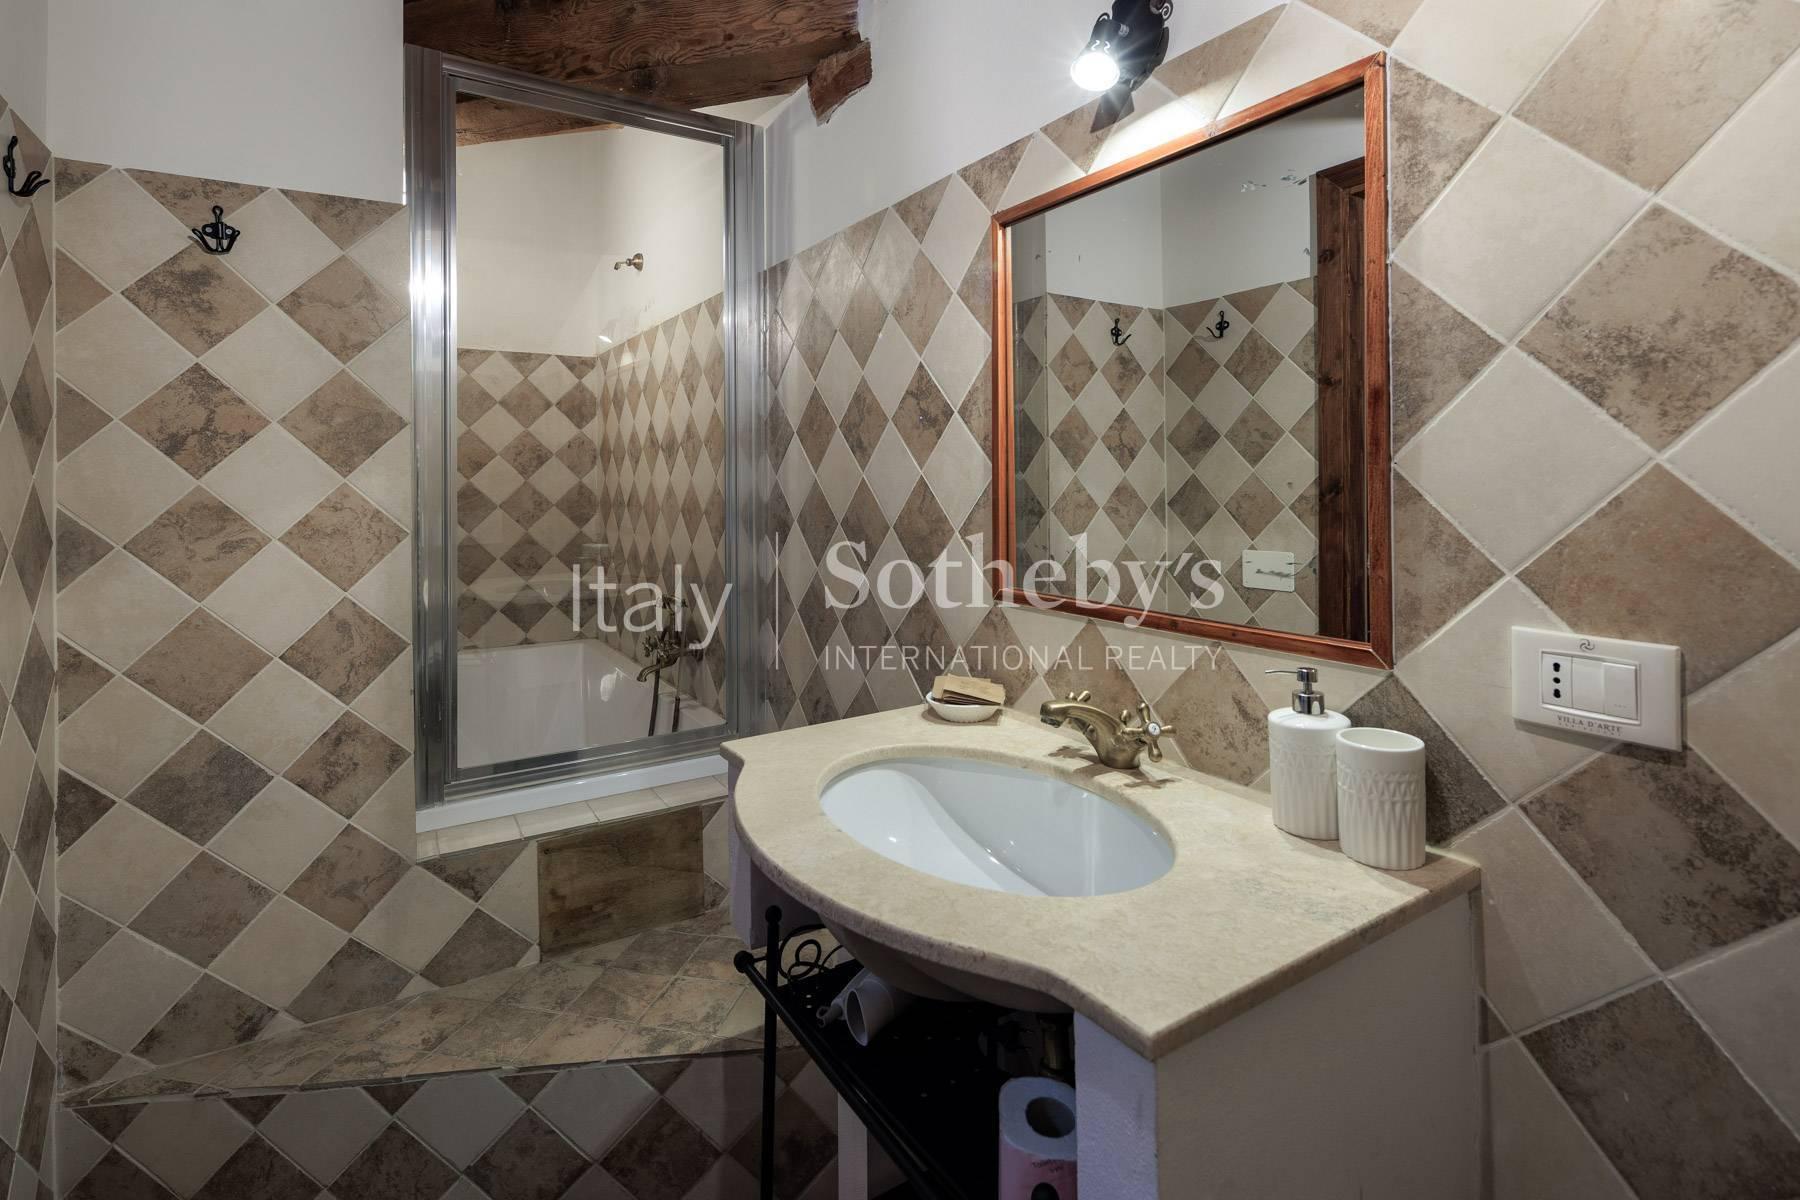 Exclusive resort recently renovated in Tuscany - 23